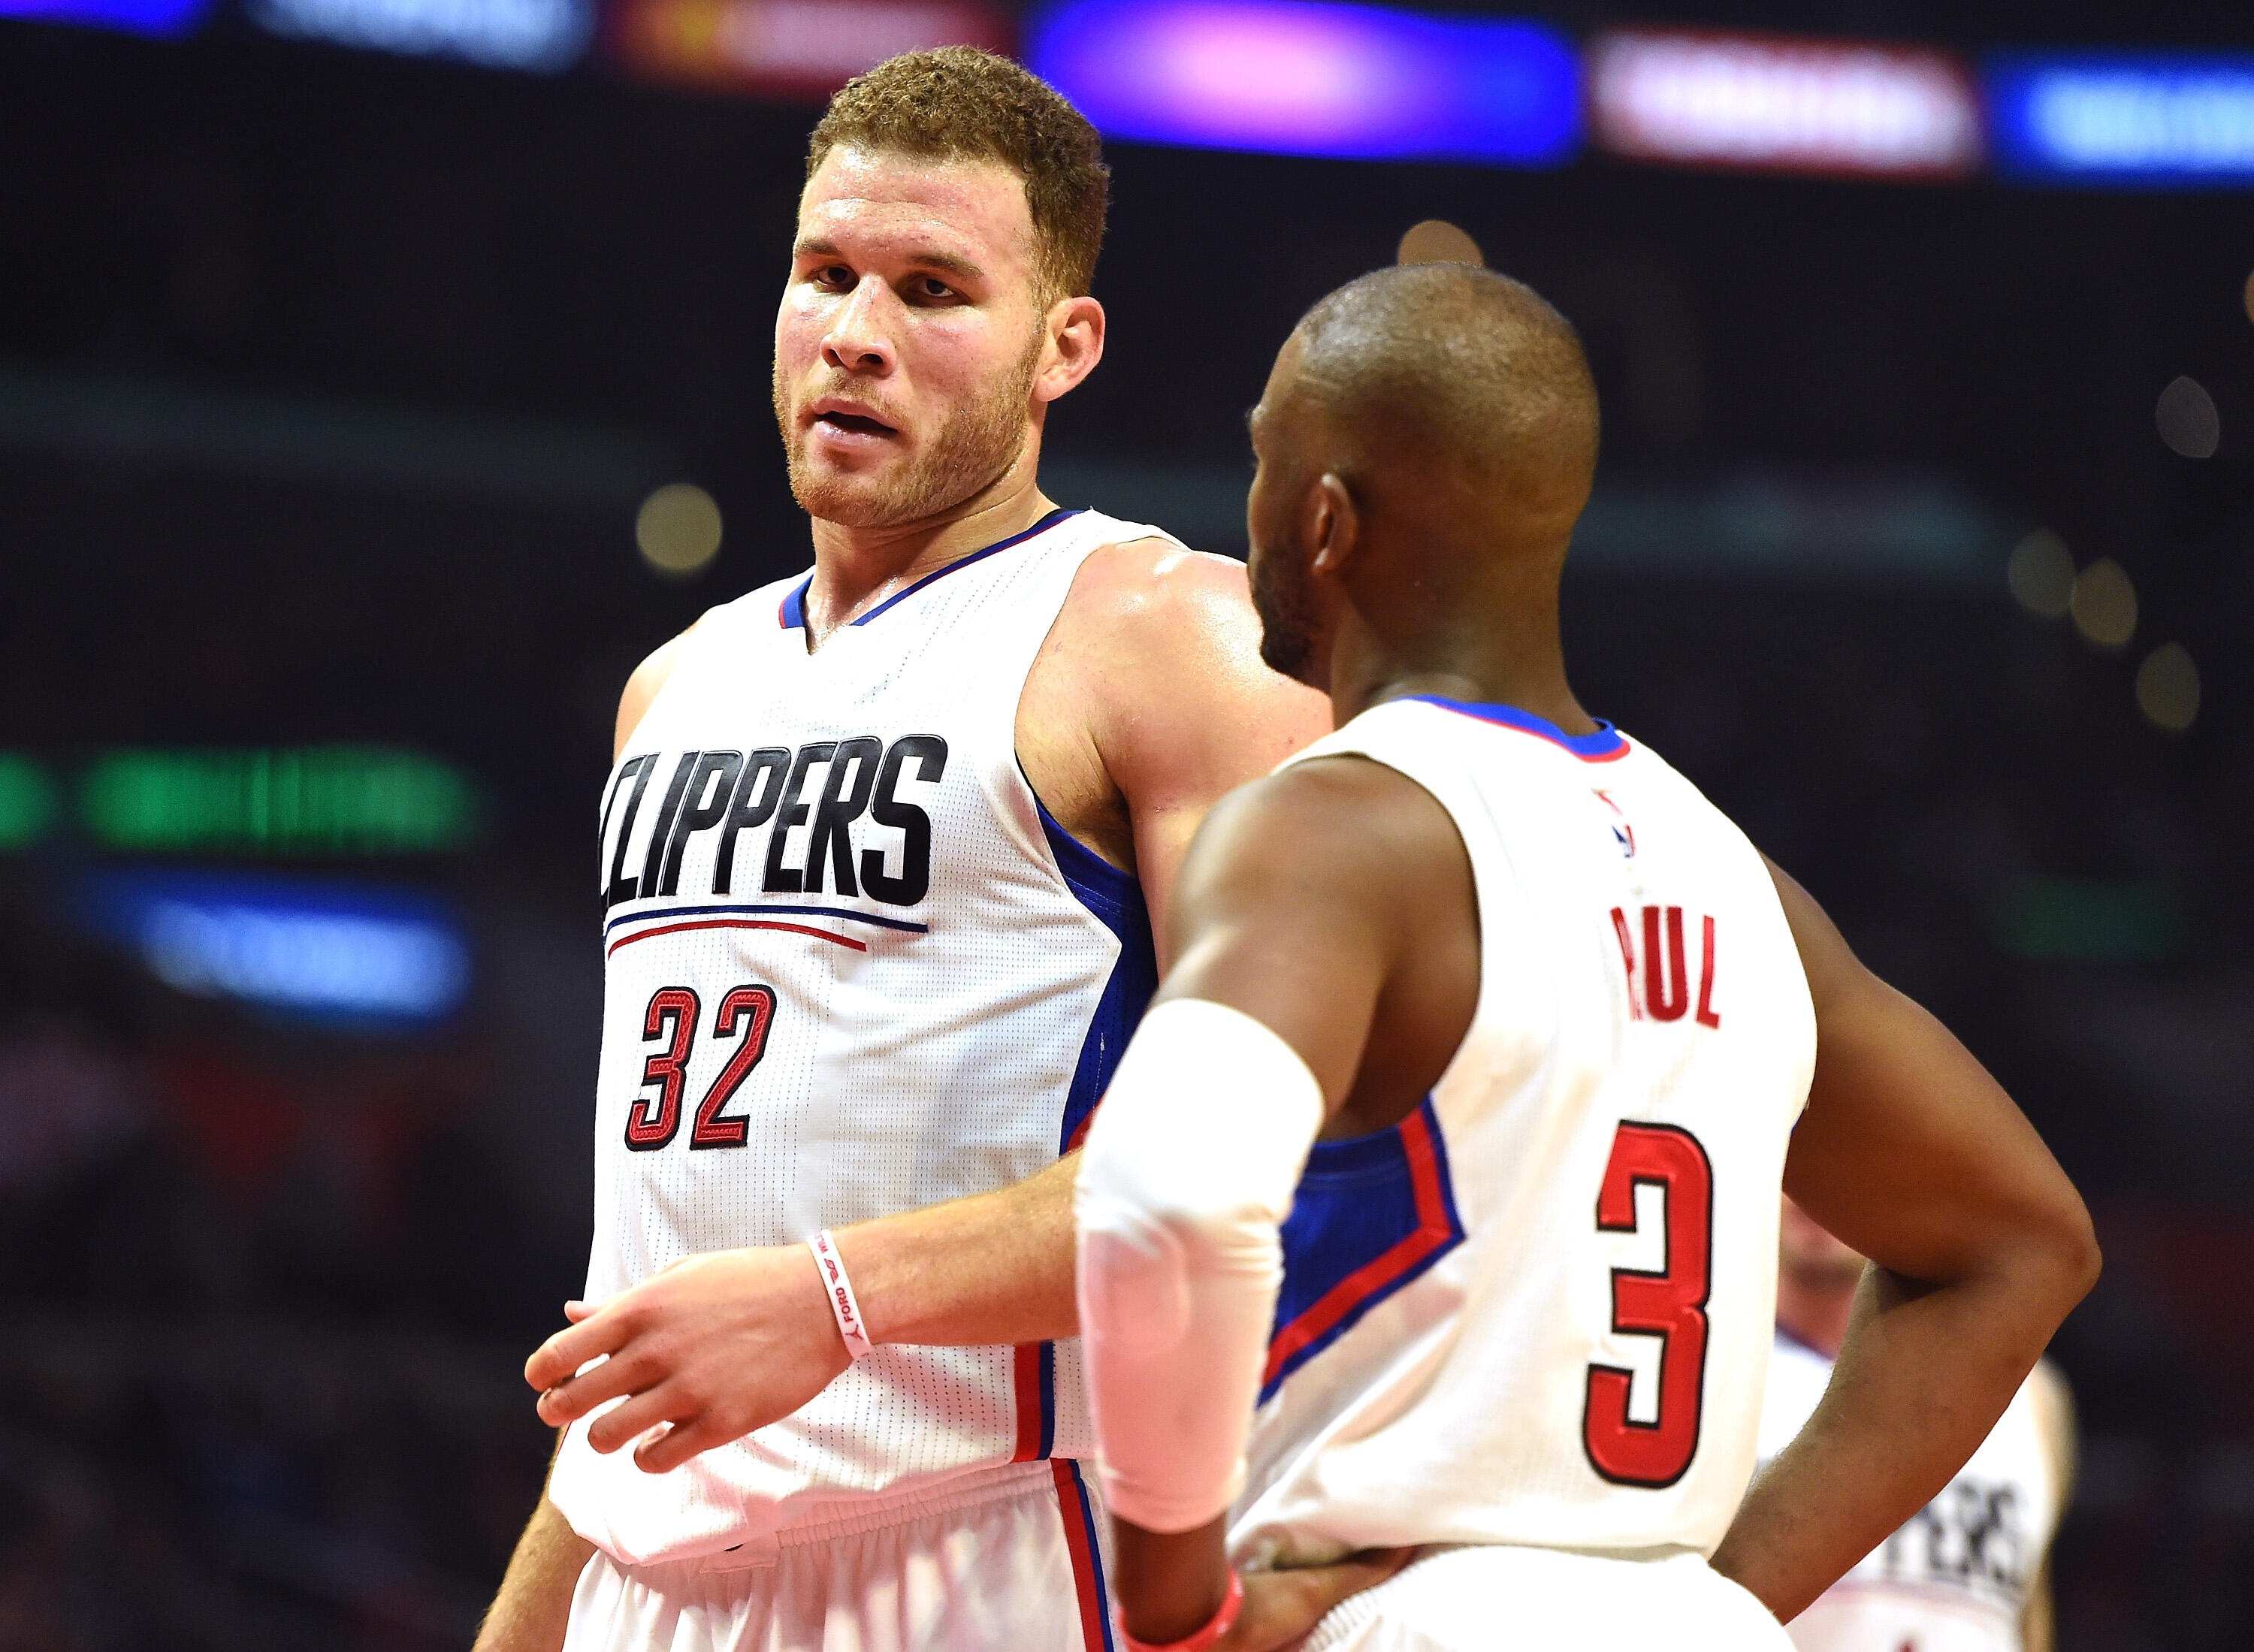 LOS ANGELES, CA - NOVEMBER 16:  Blake Griffin #32 and Chris Paul #3 of the LA Clippers react after a Clipper foul during the first half against the Memphis Grizzlies at Staples Center on November 16, 2016 in Los Angeles, California.   NOTE TO USER: User e